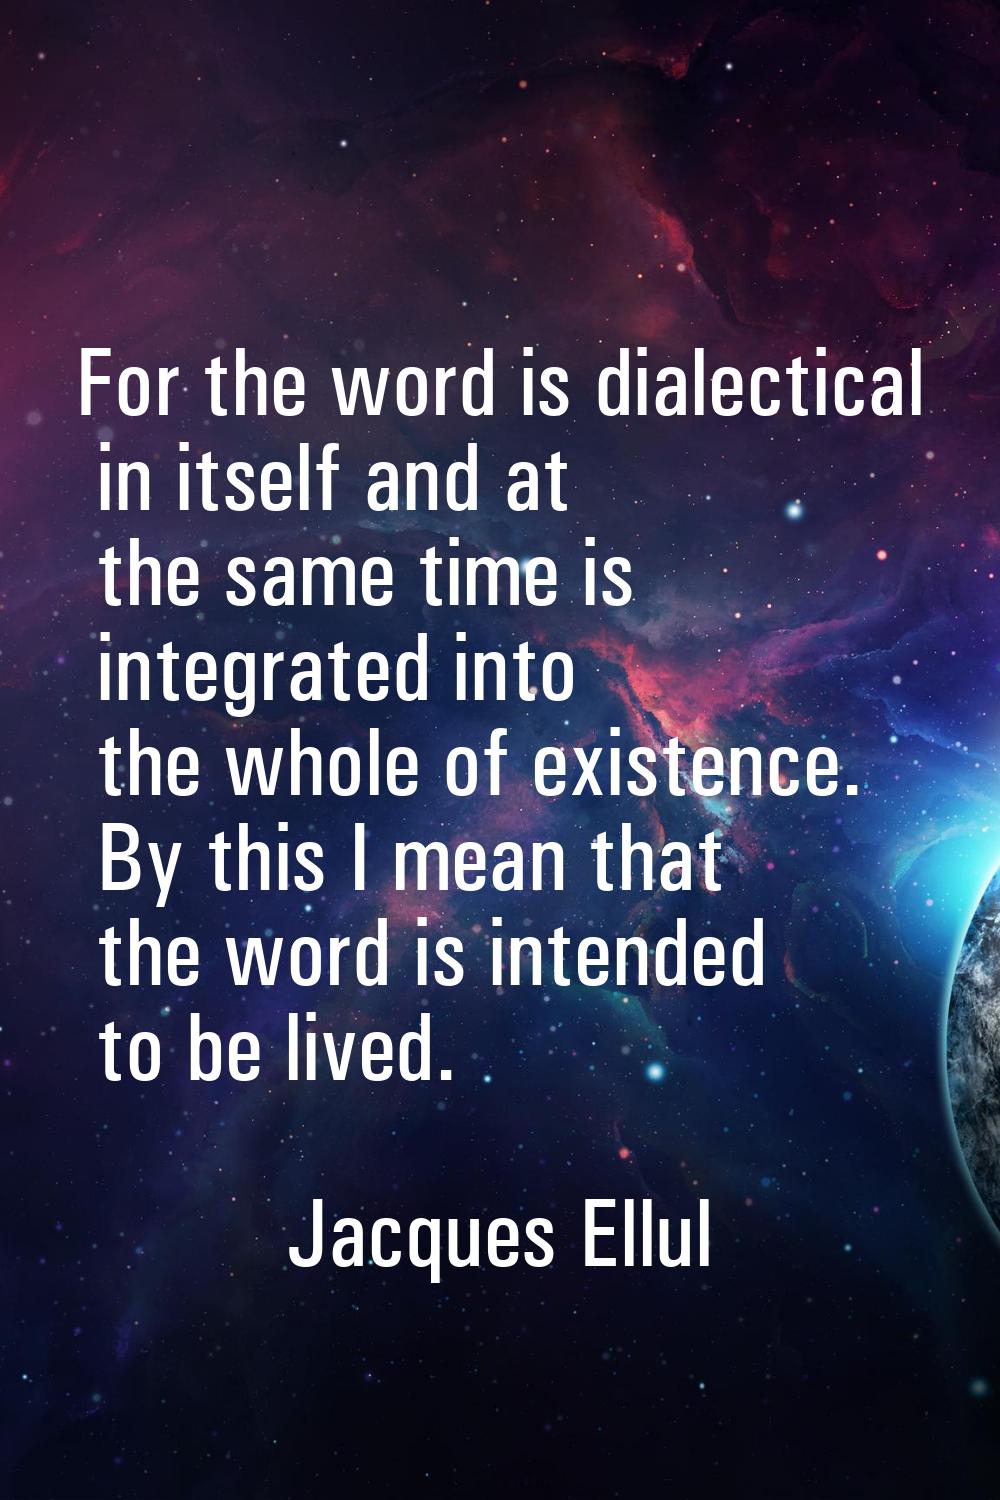 For the word is dialectical in itself and at the same time is integrated into the whole of existenc